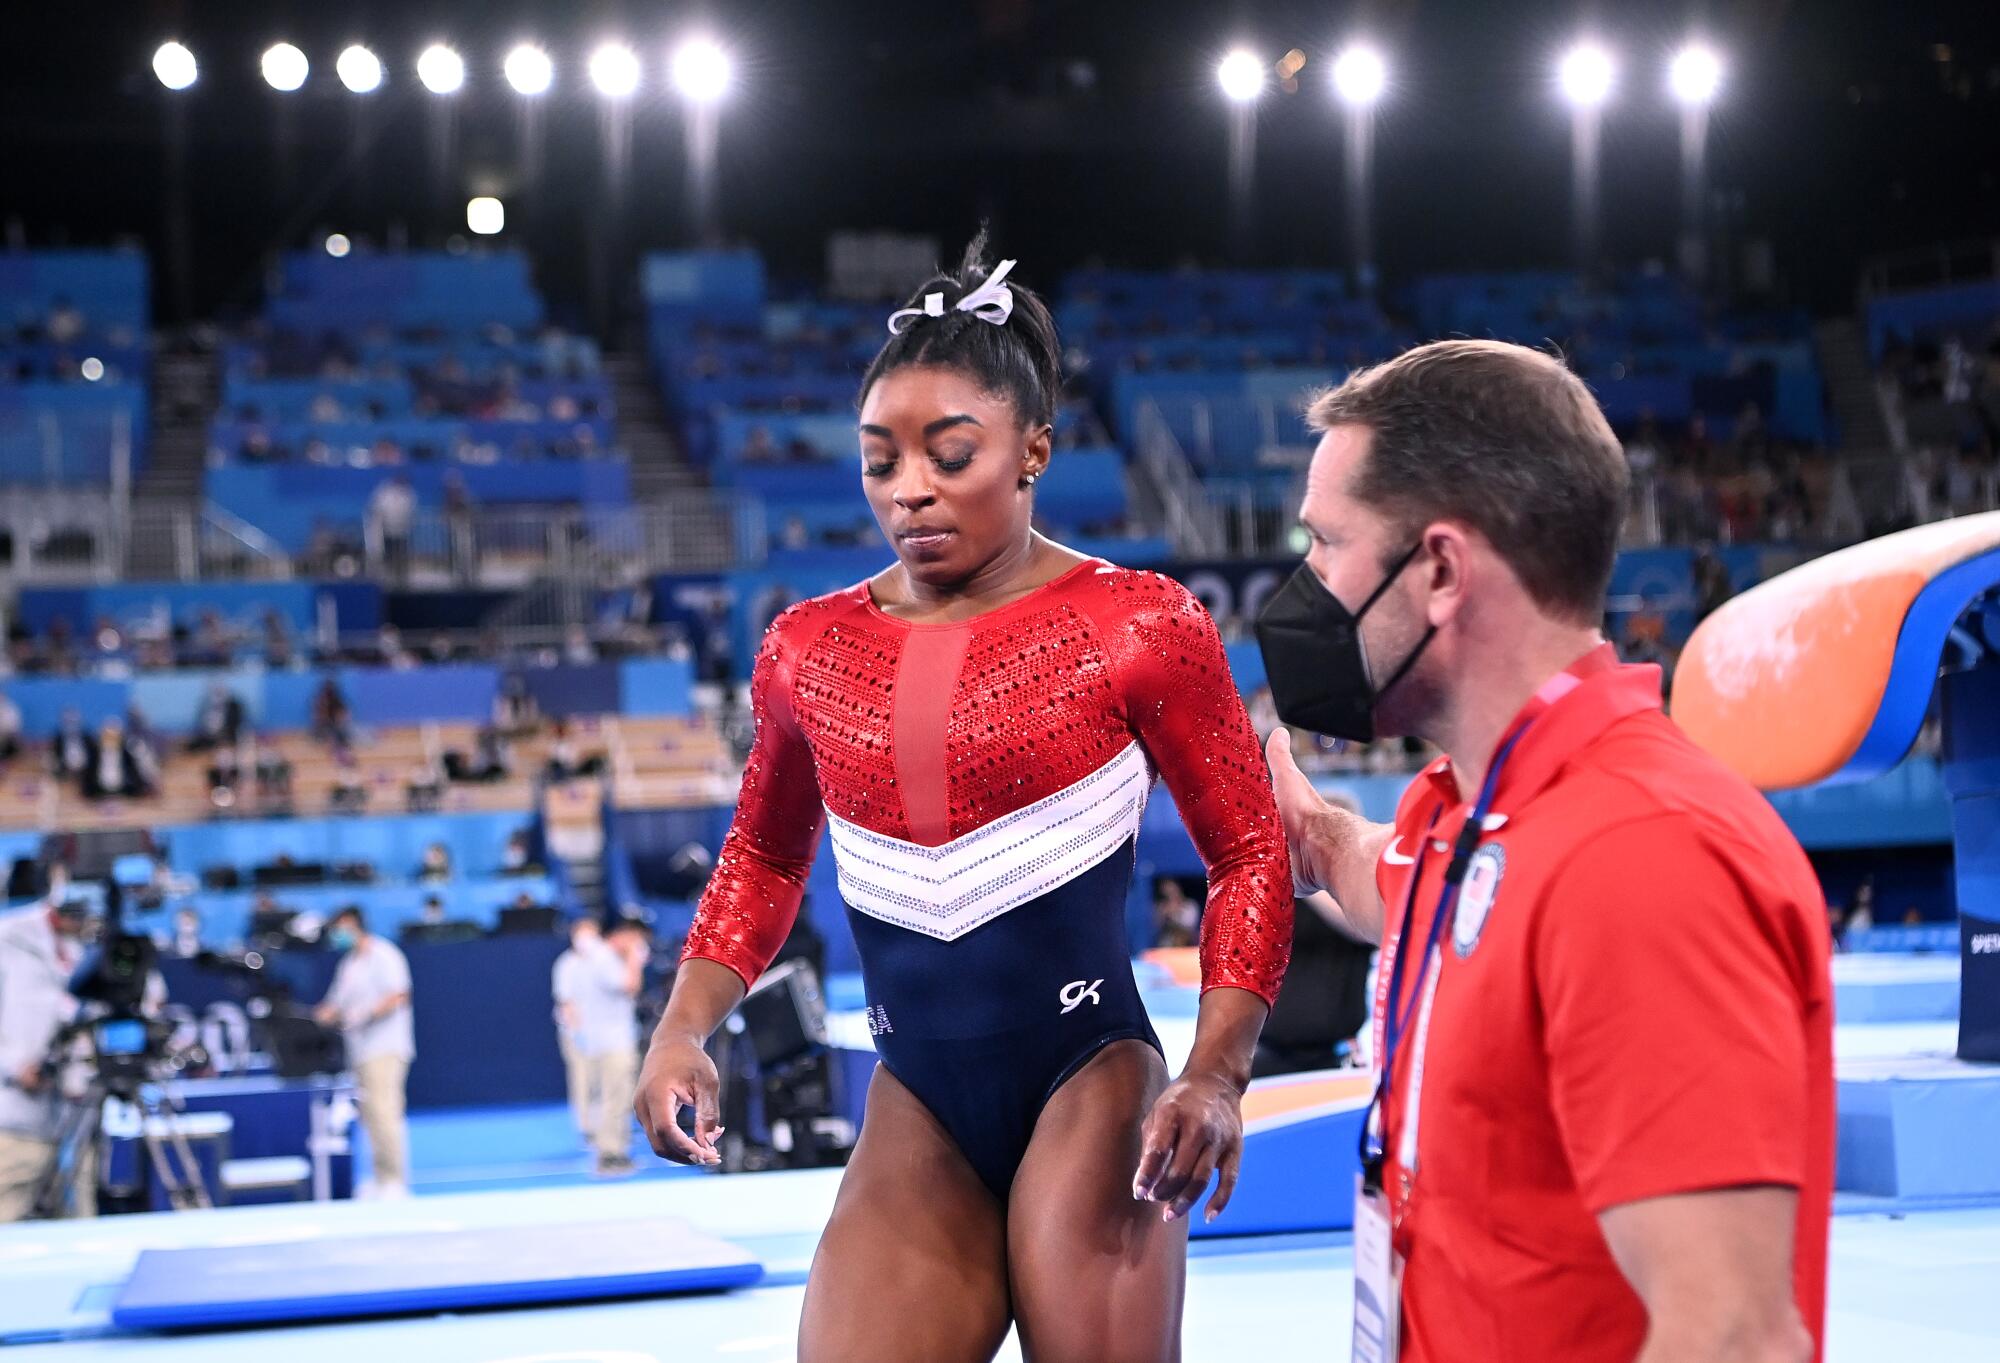 U.S. gymnast Simone Biles walks off the floor after competing in the vault during the women's team final.